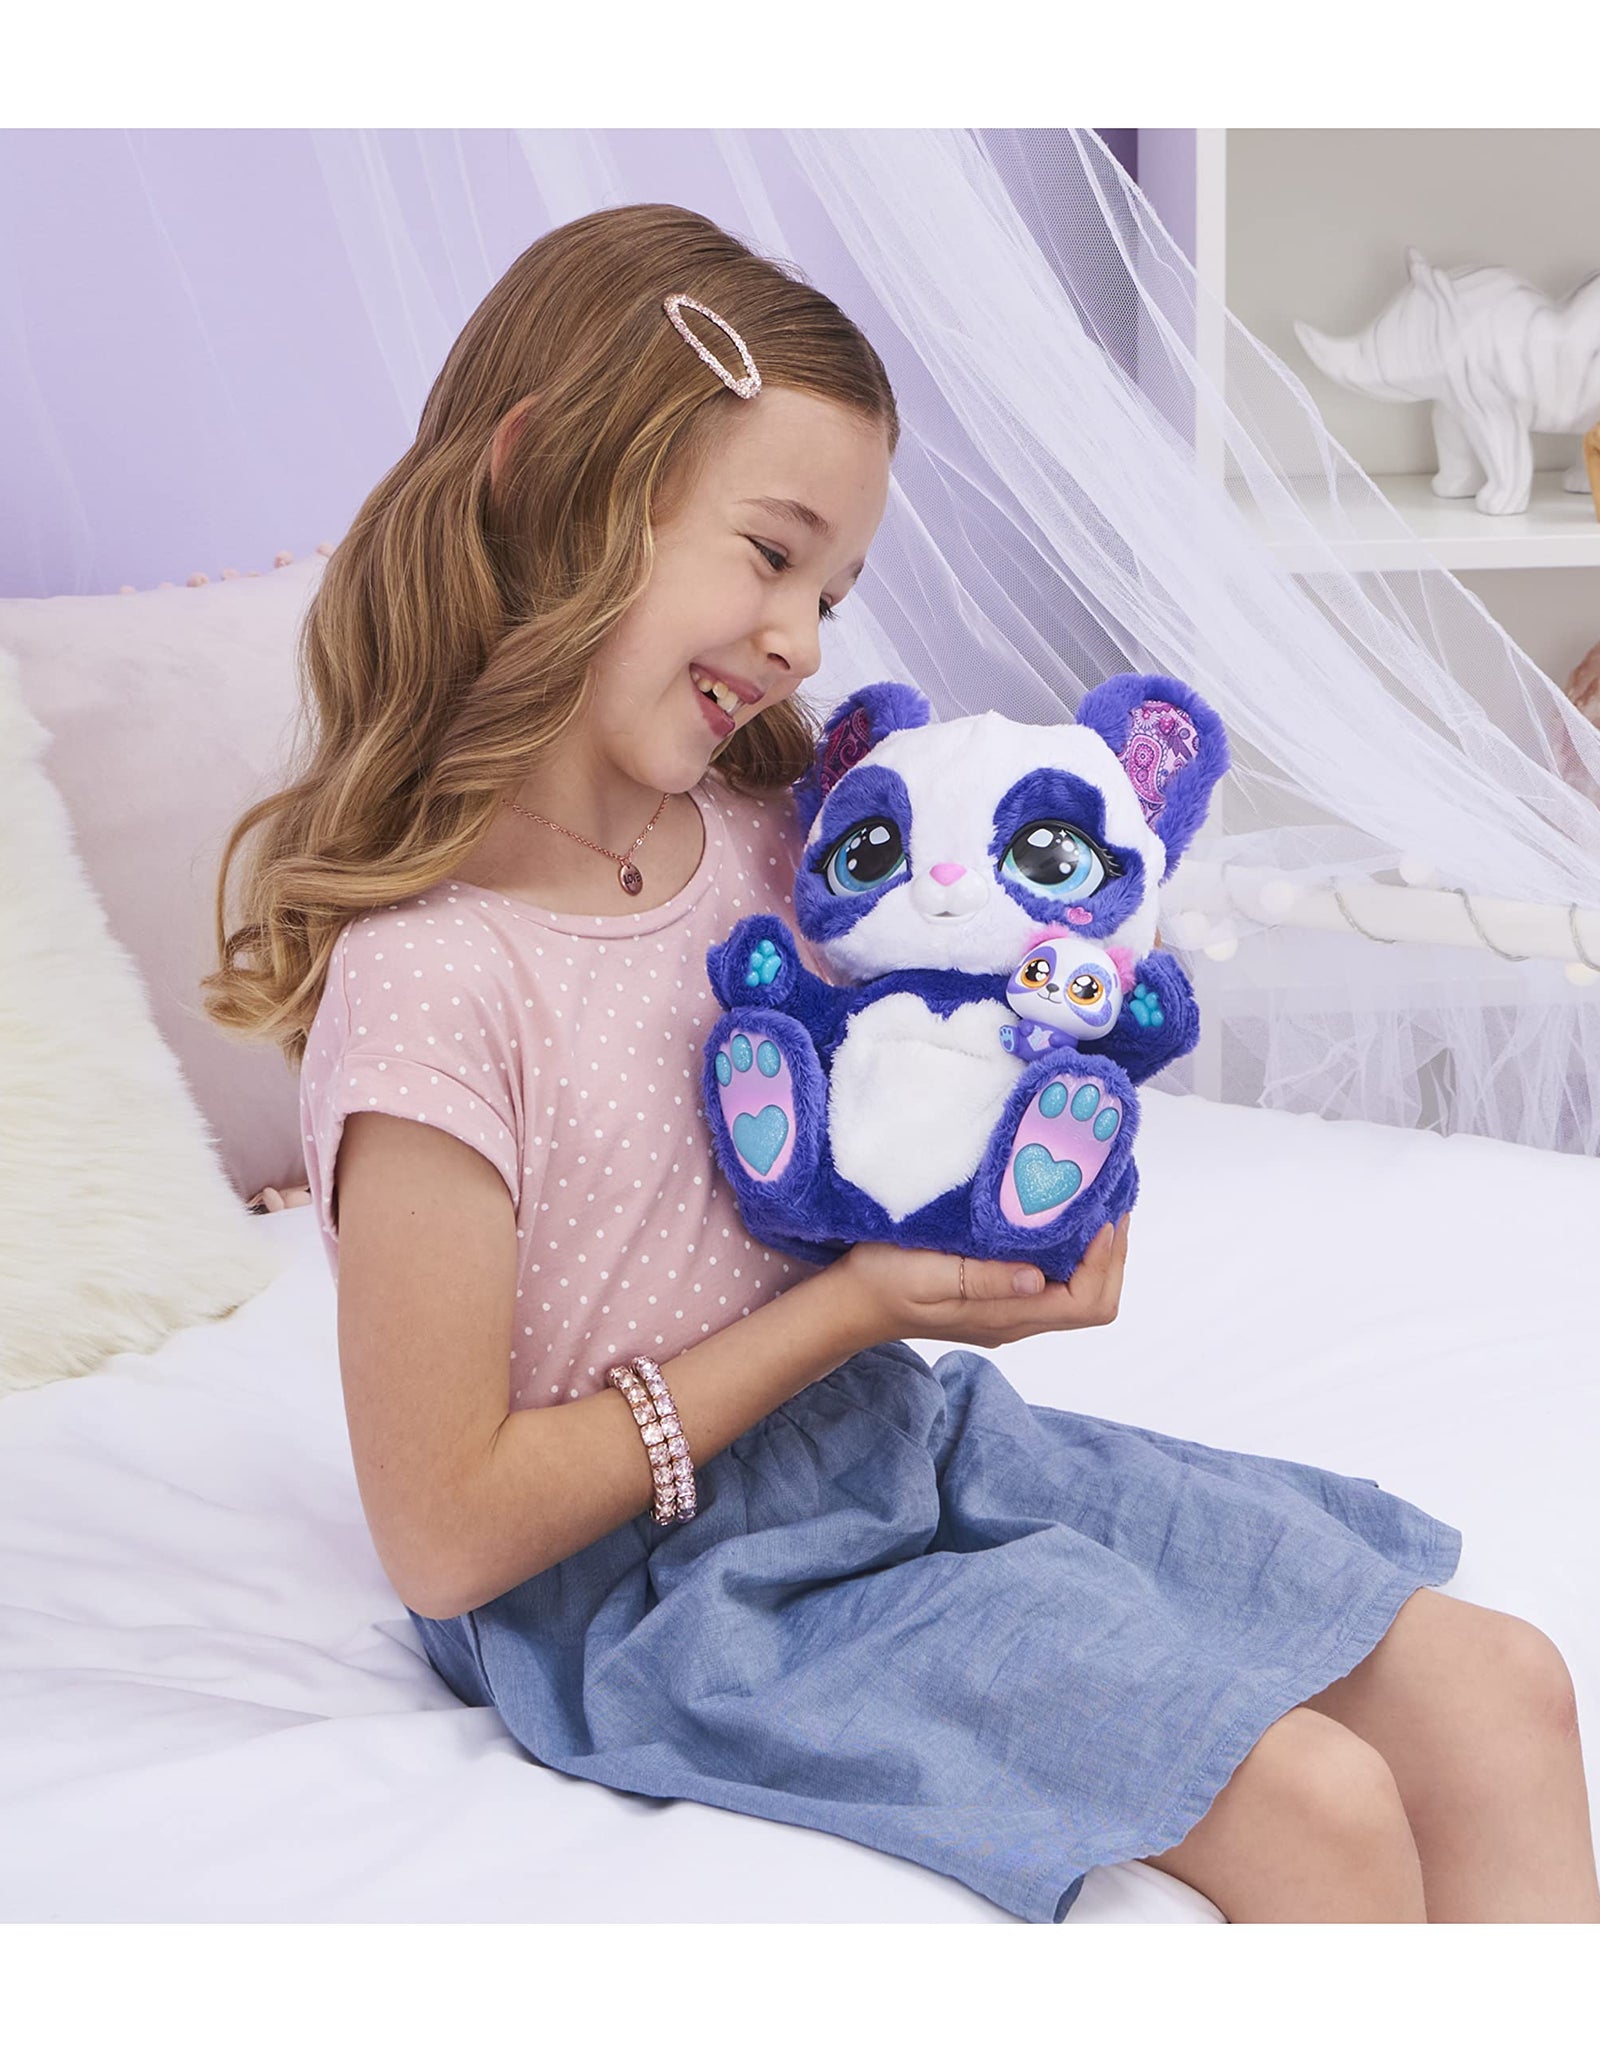 Peek-A-Roo, Interactive Panda-Roo Plush Toy with Mystery Baby and Over 150 Sounds and Actions, Kids Toys for Girls Ages 5 and up